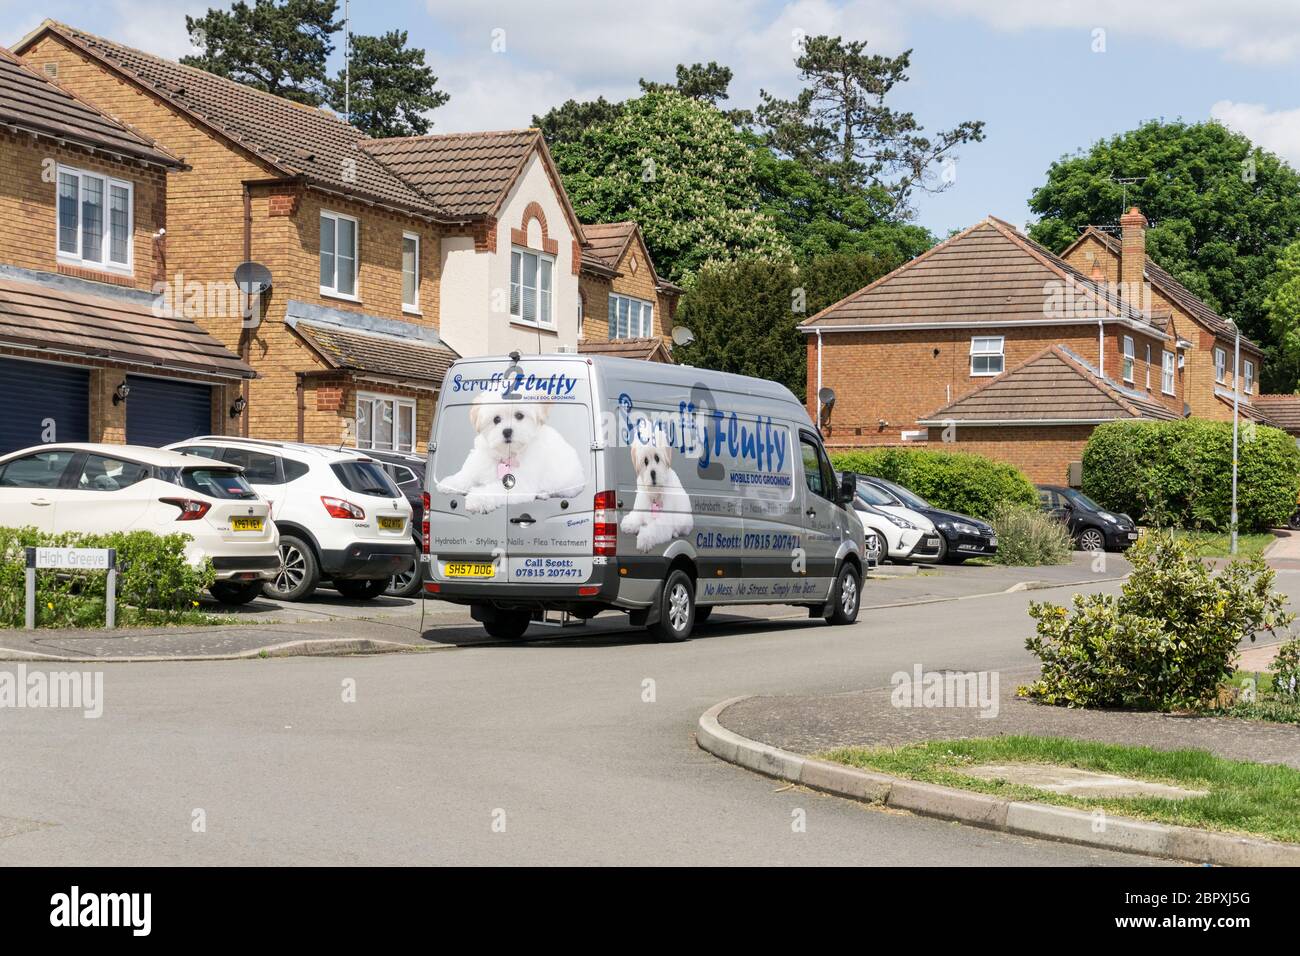 Scruffy to Fluffy, a mobile dog grooming business, outside a 1990's detached house, Wootton, Northampton, UK Stock Photo